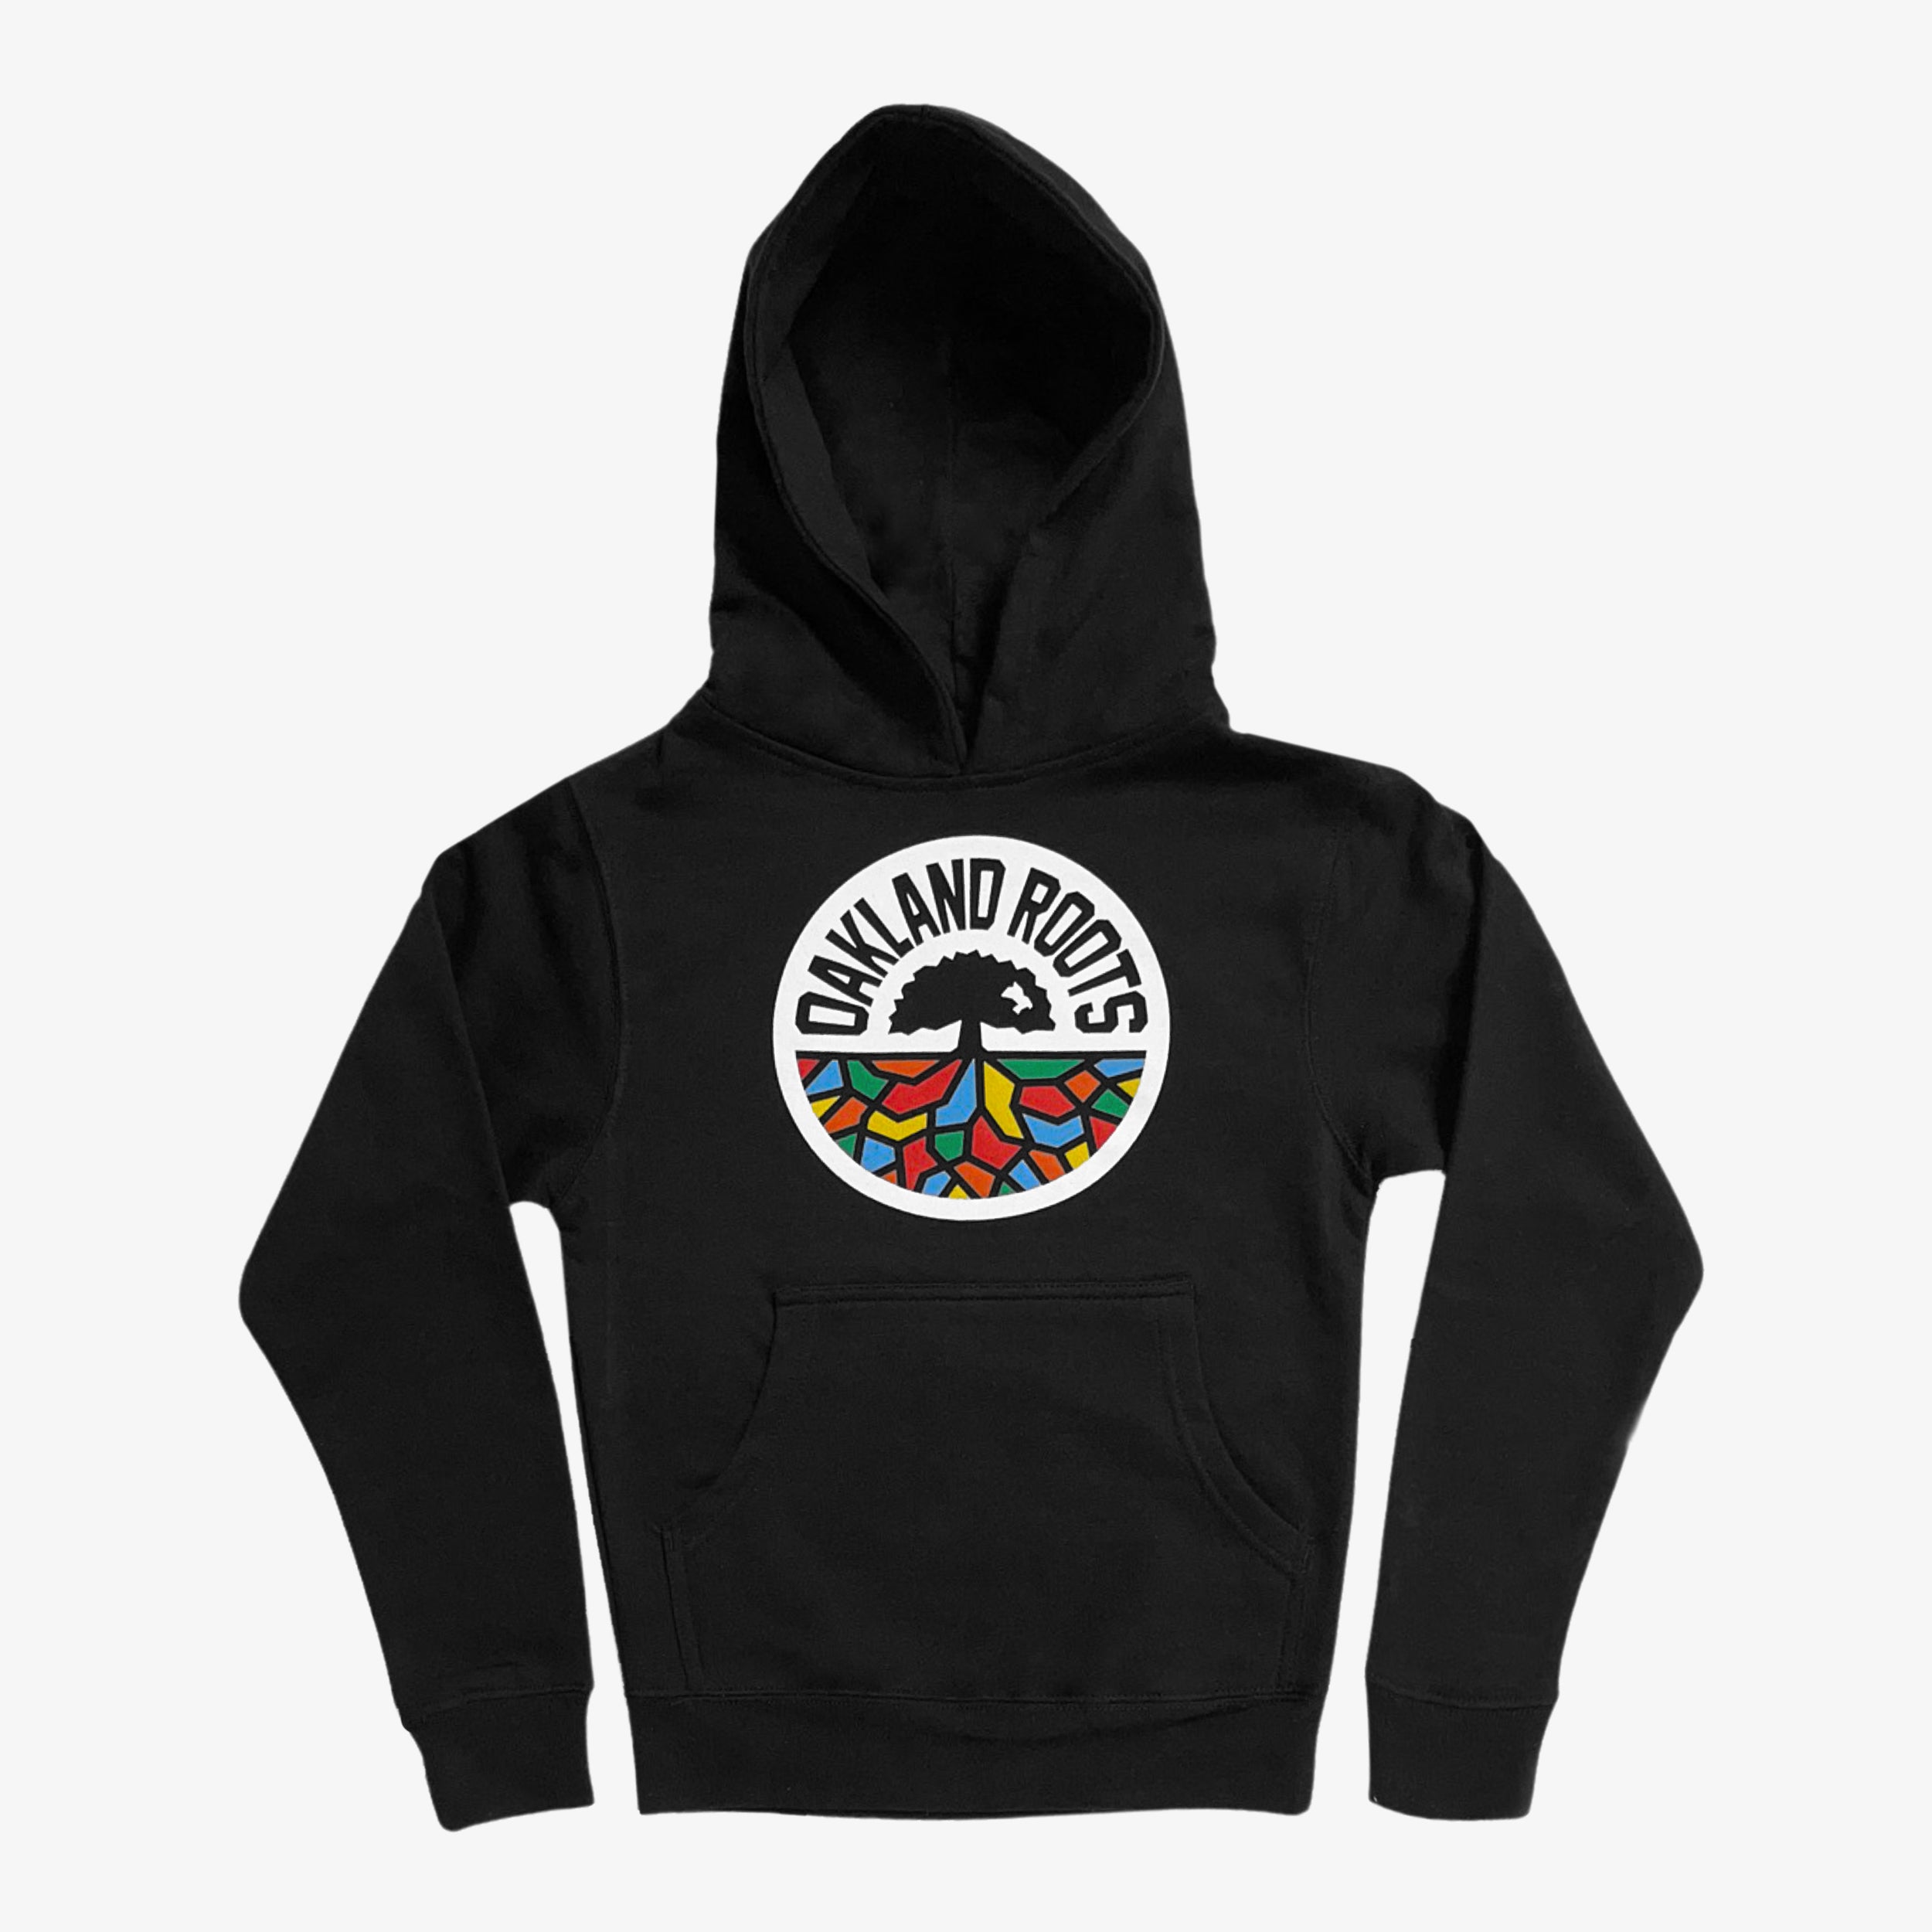 Black youth hoodie with full color Oakland Roots logo crest.